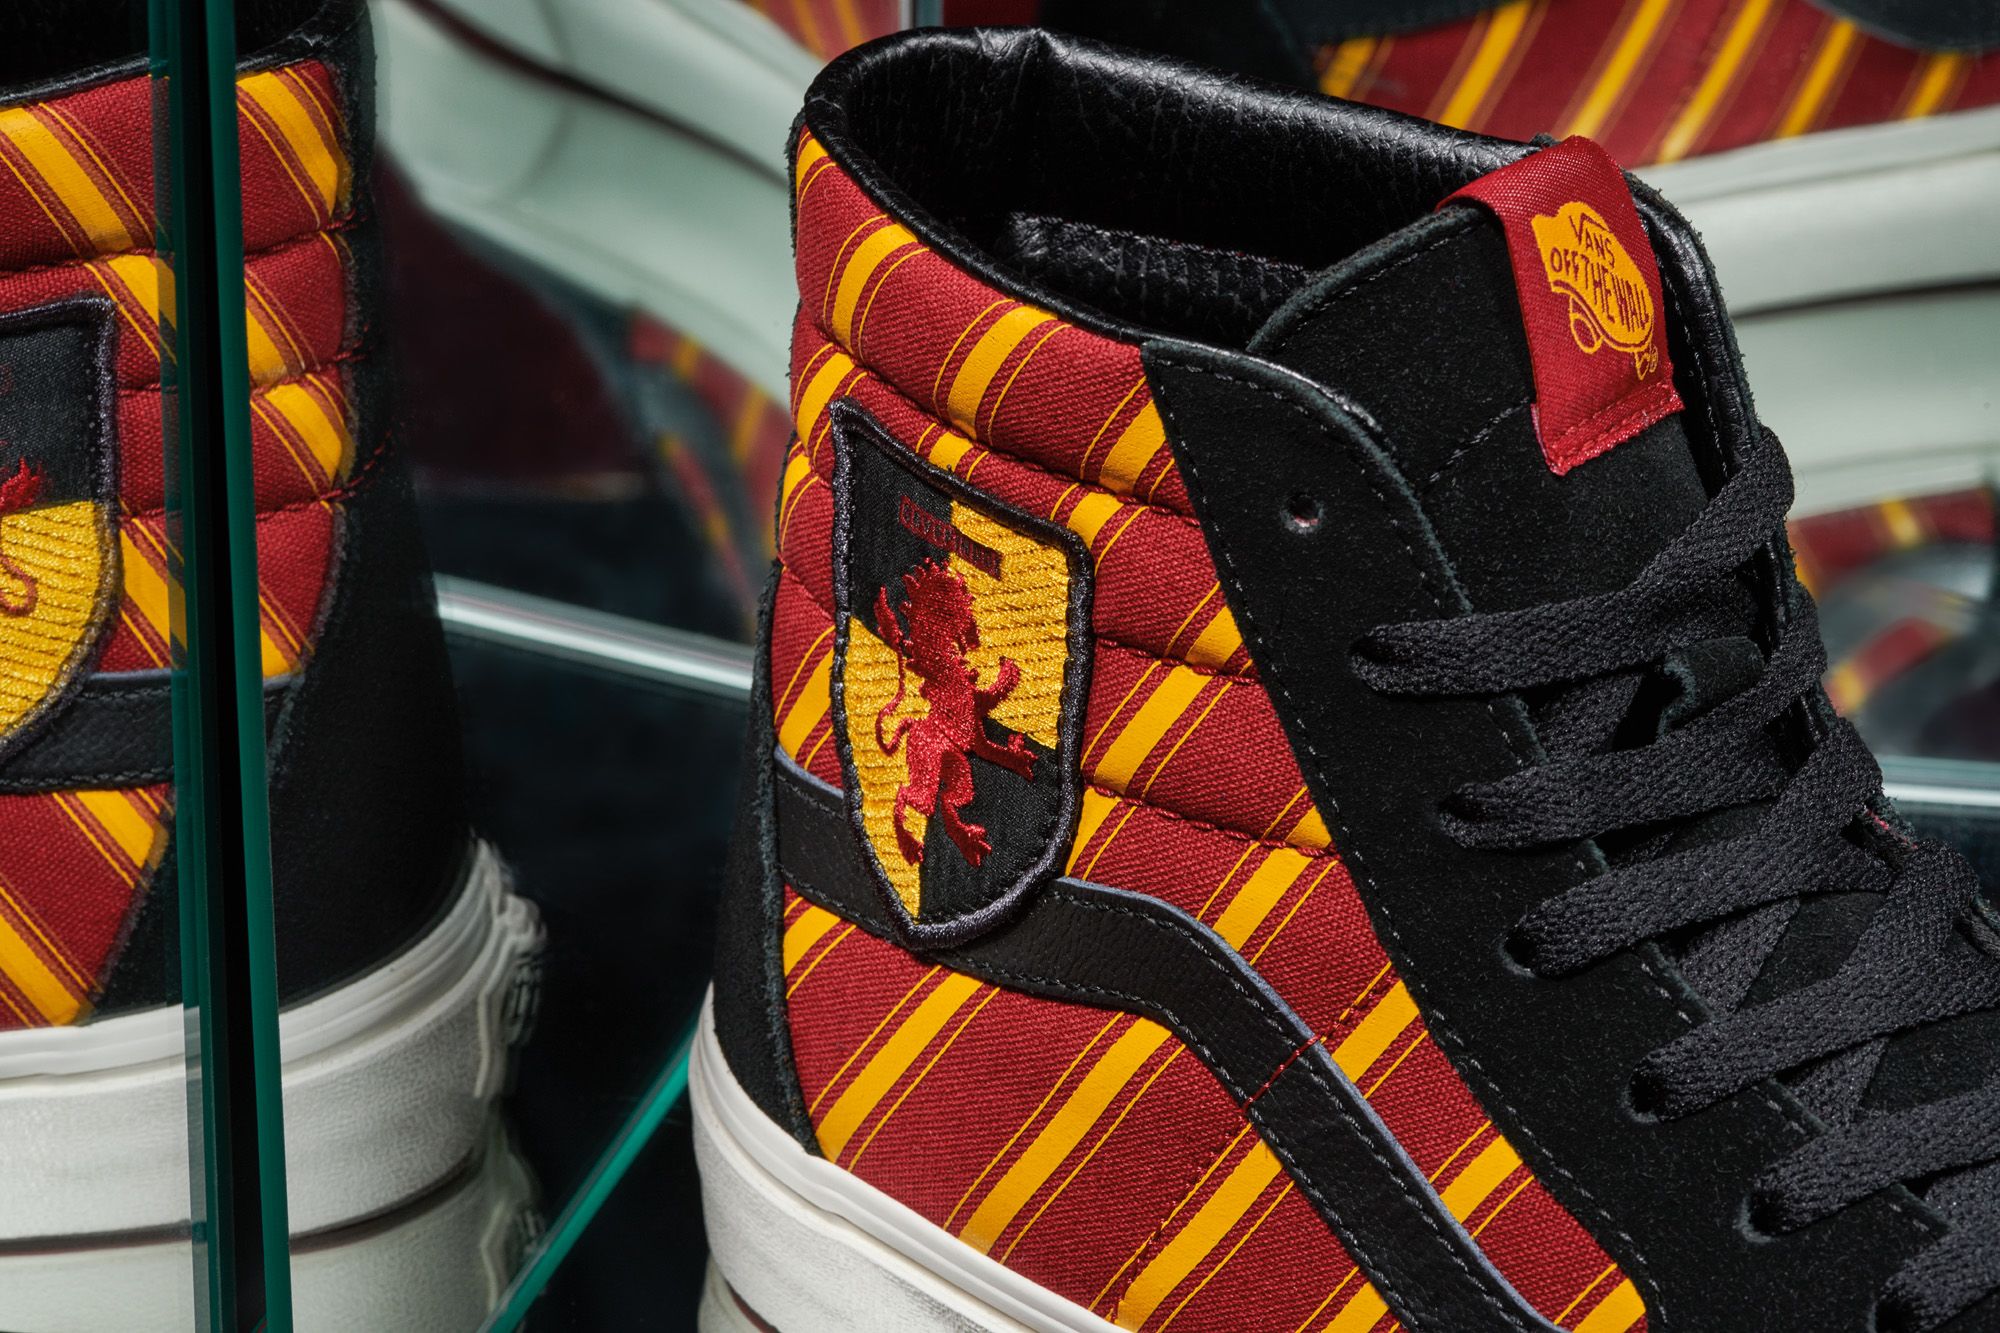 Customized some Harry Potter vans! Shoutout to my Hufflepuffs! : r